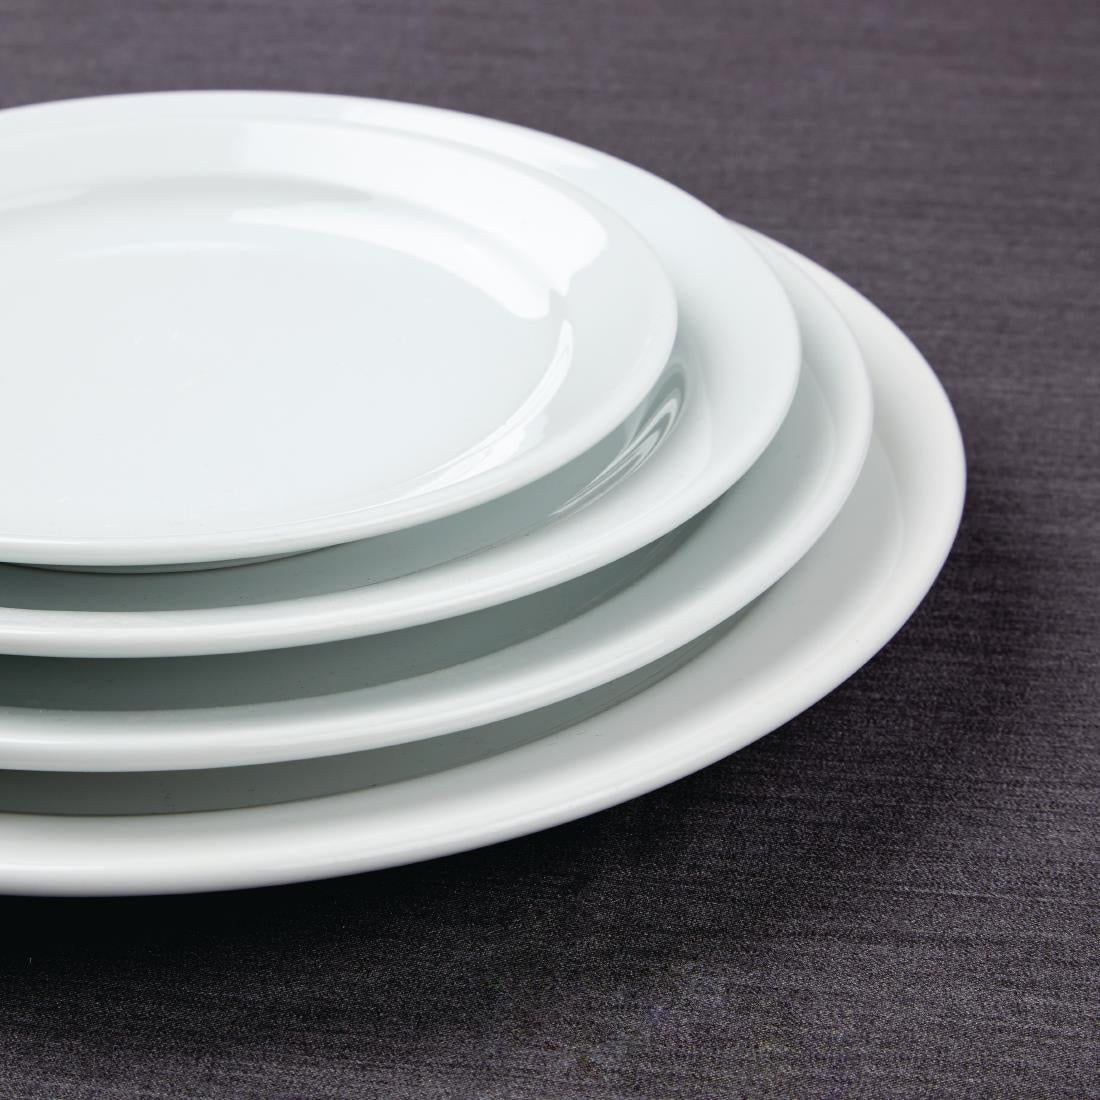 CF360 Olympia Athena Narrow Rimmed Plates 165mm (Pack of 12)